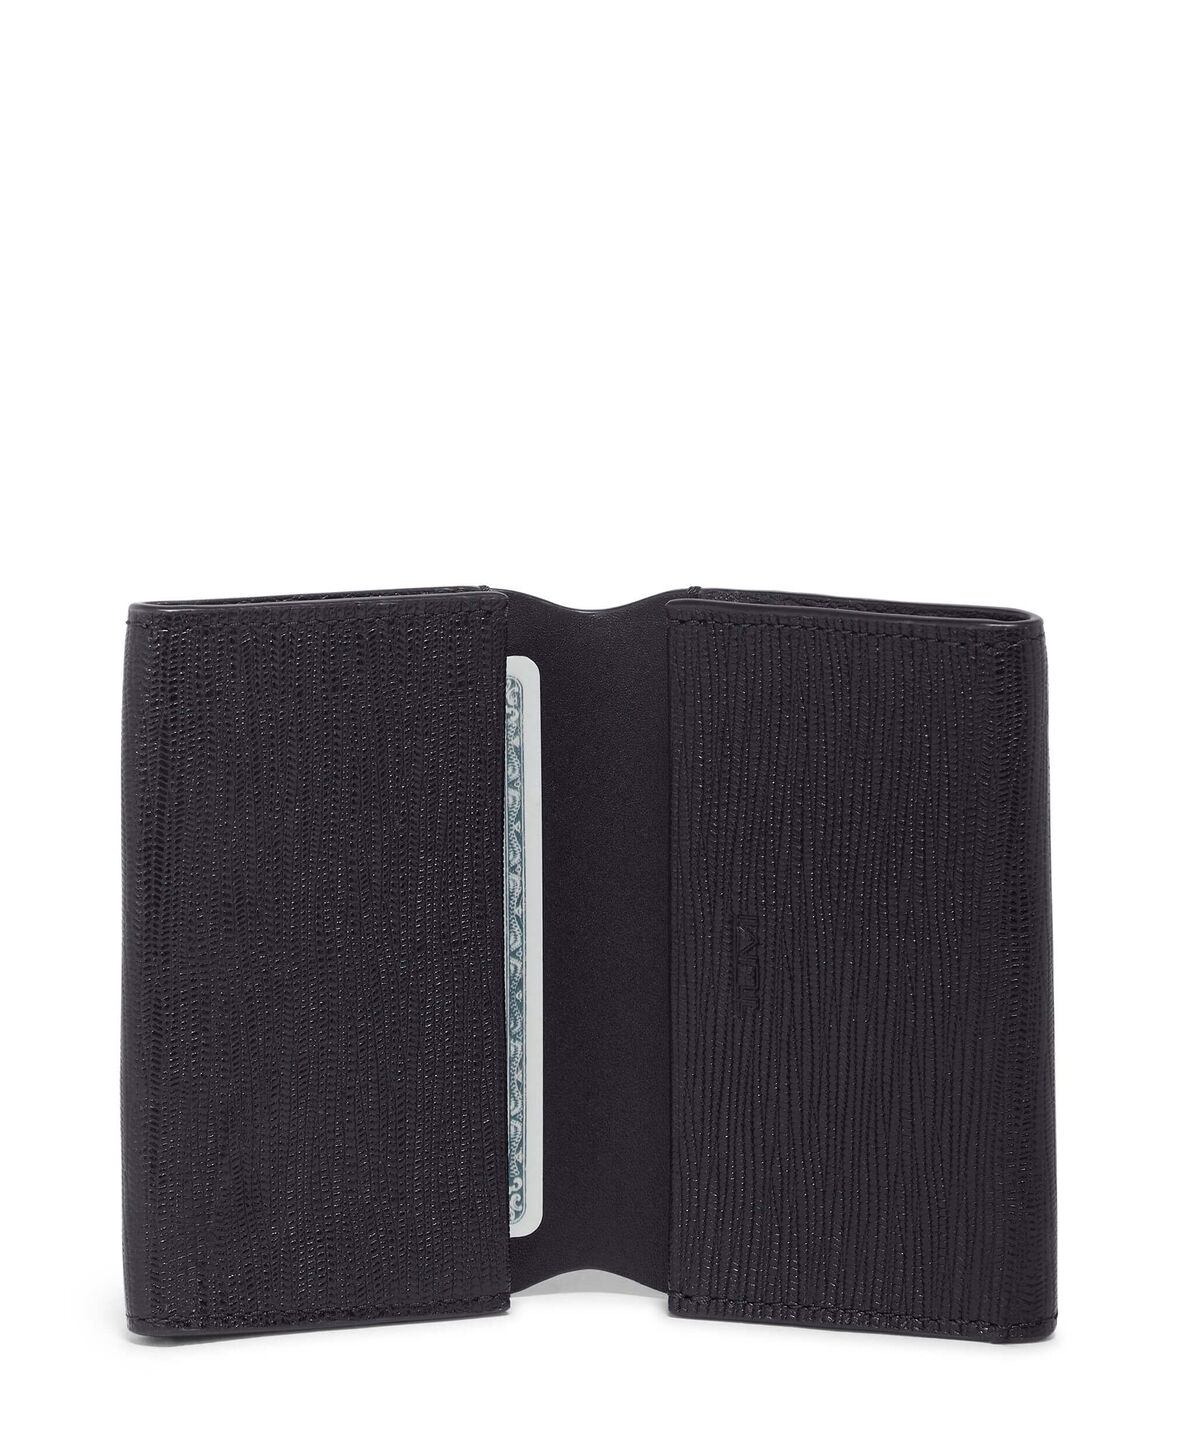 Tumi Nassau DOUBLE GUSSETED CARD CASE  Black Embossed